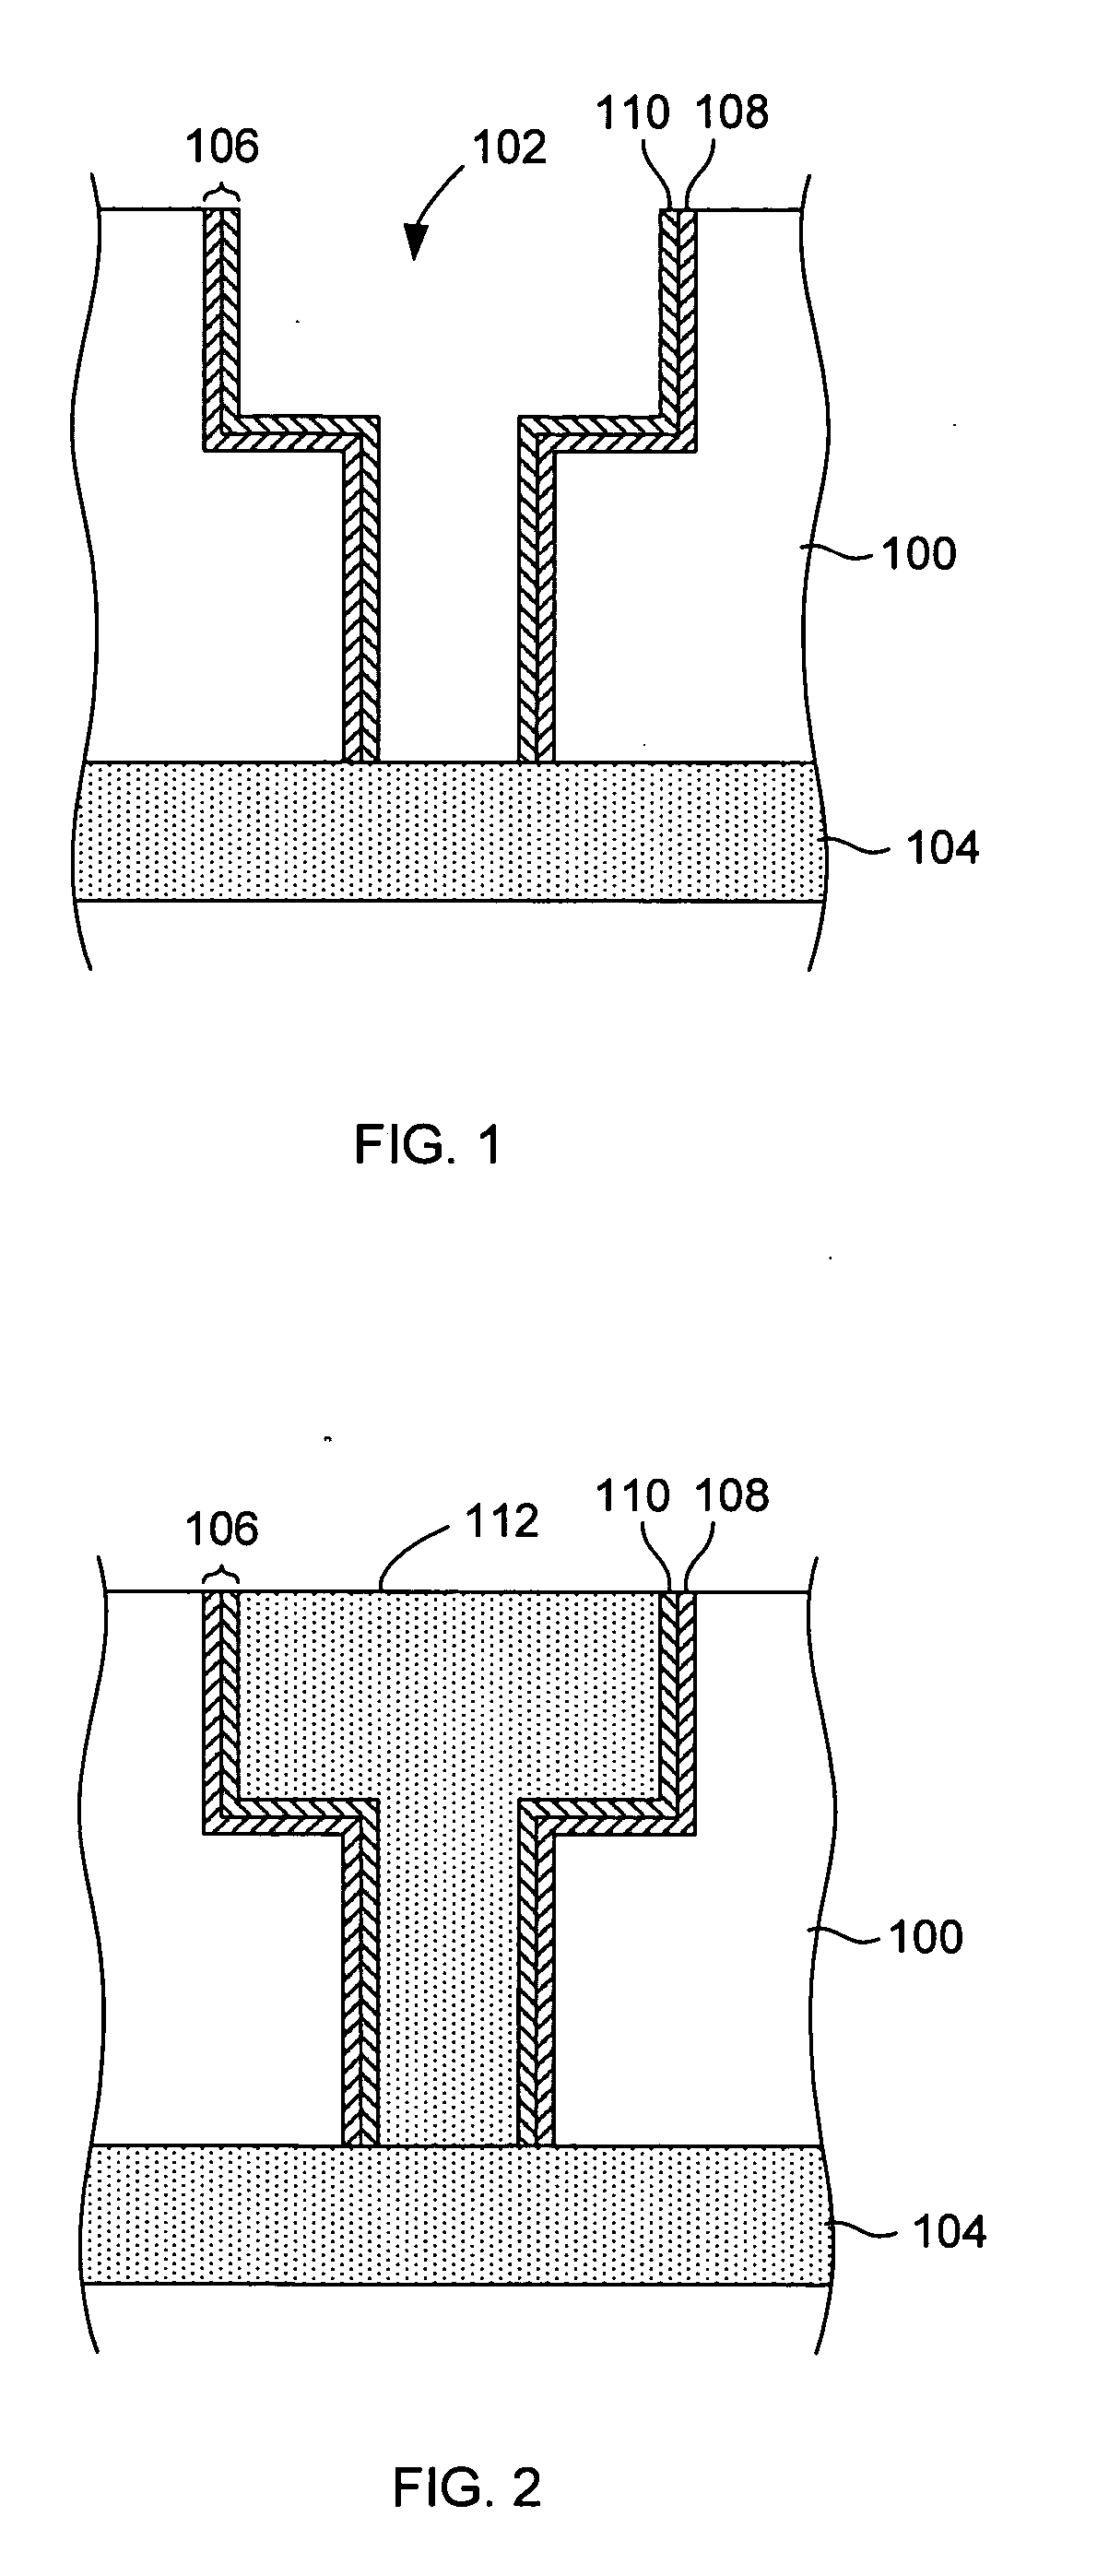 Integrated barrier and seed layer for copper interconnect technology